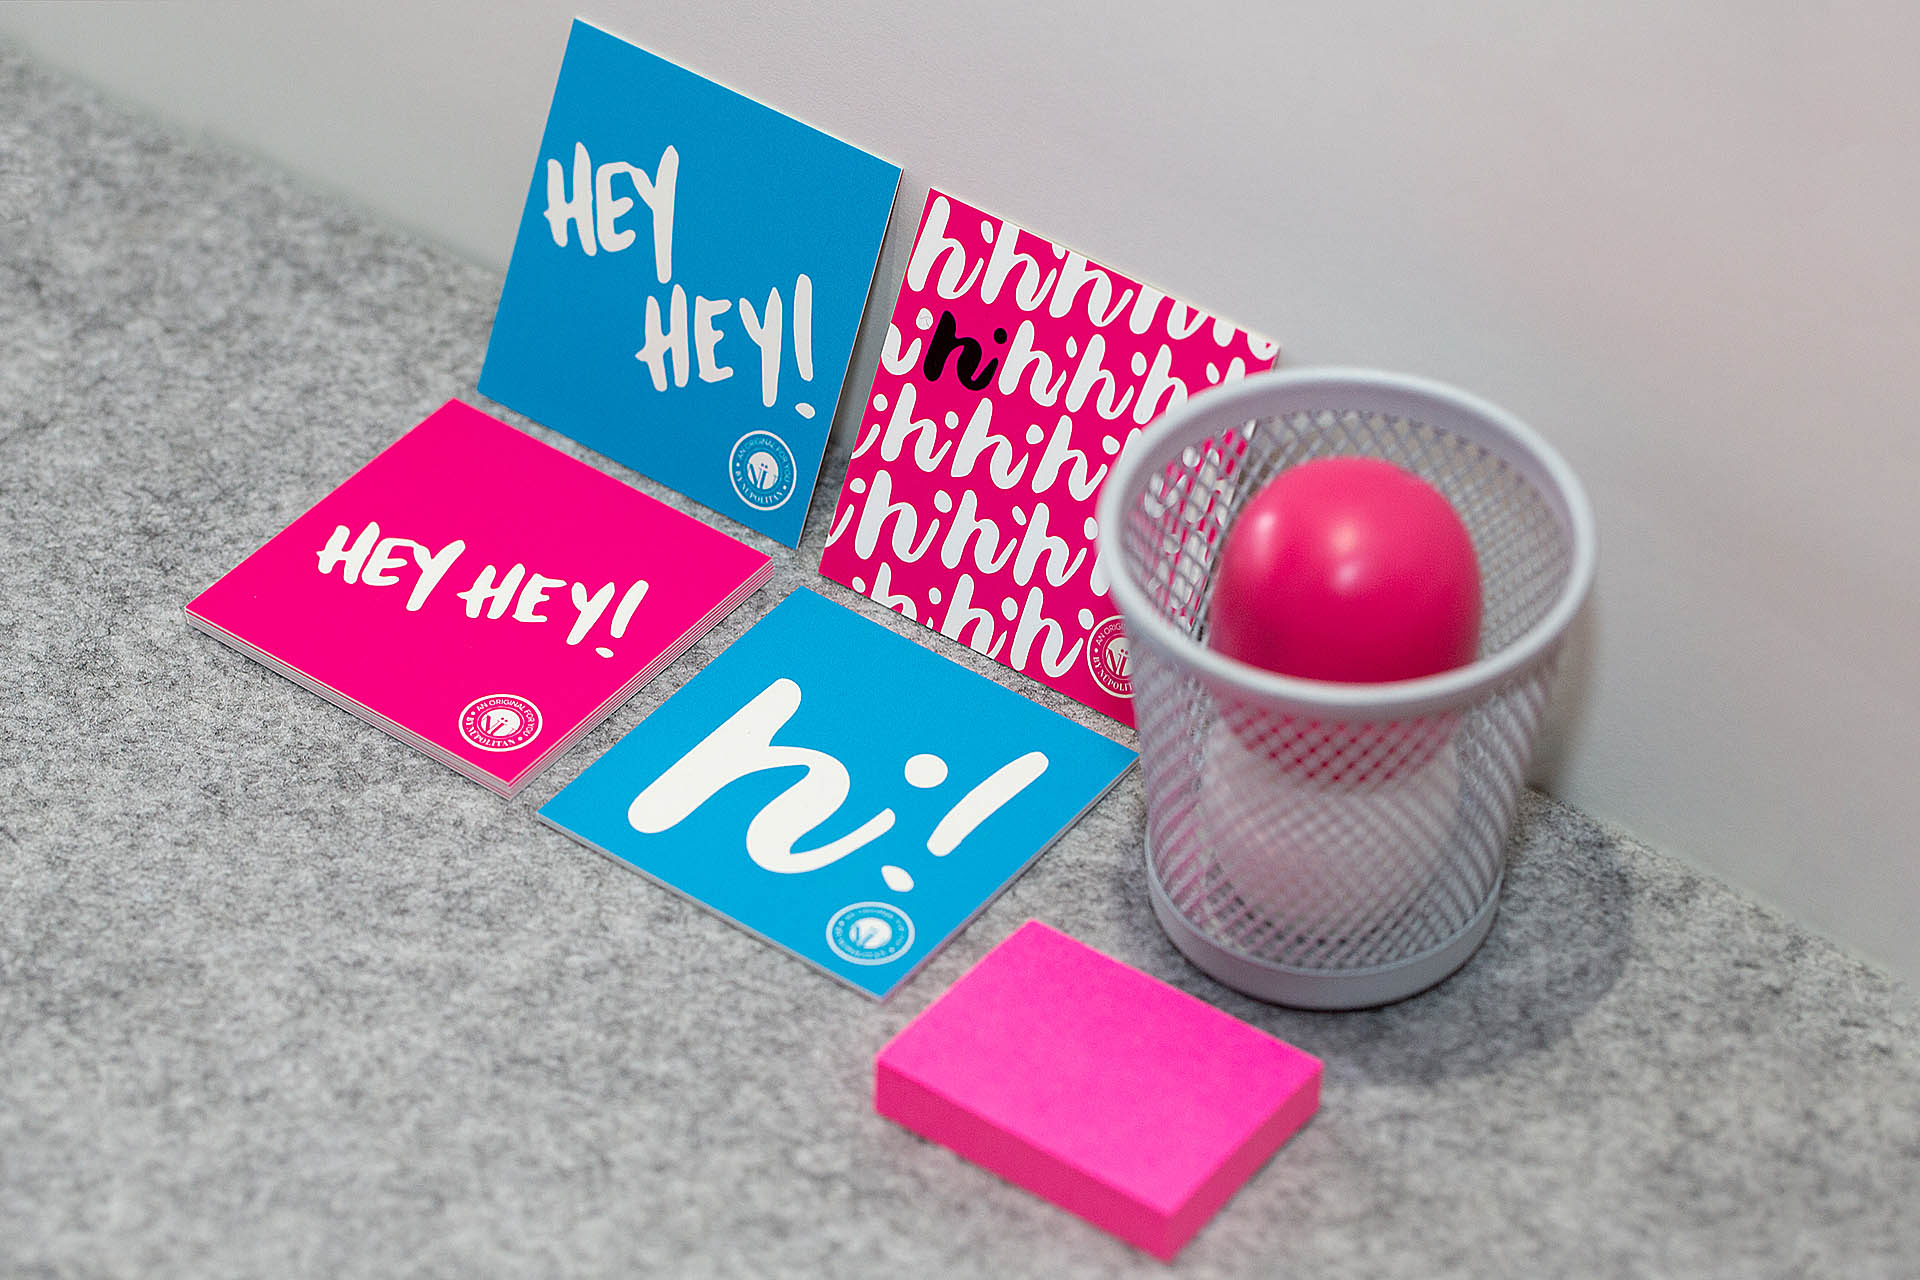 Two blue and two pink cards, a gray pencil cup, and pink post-it notes on gray felt